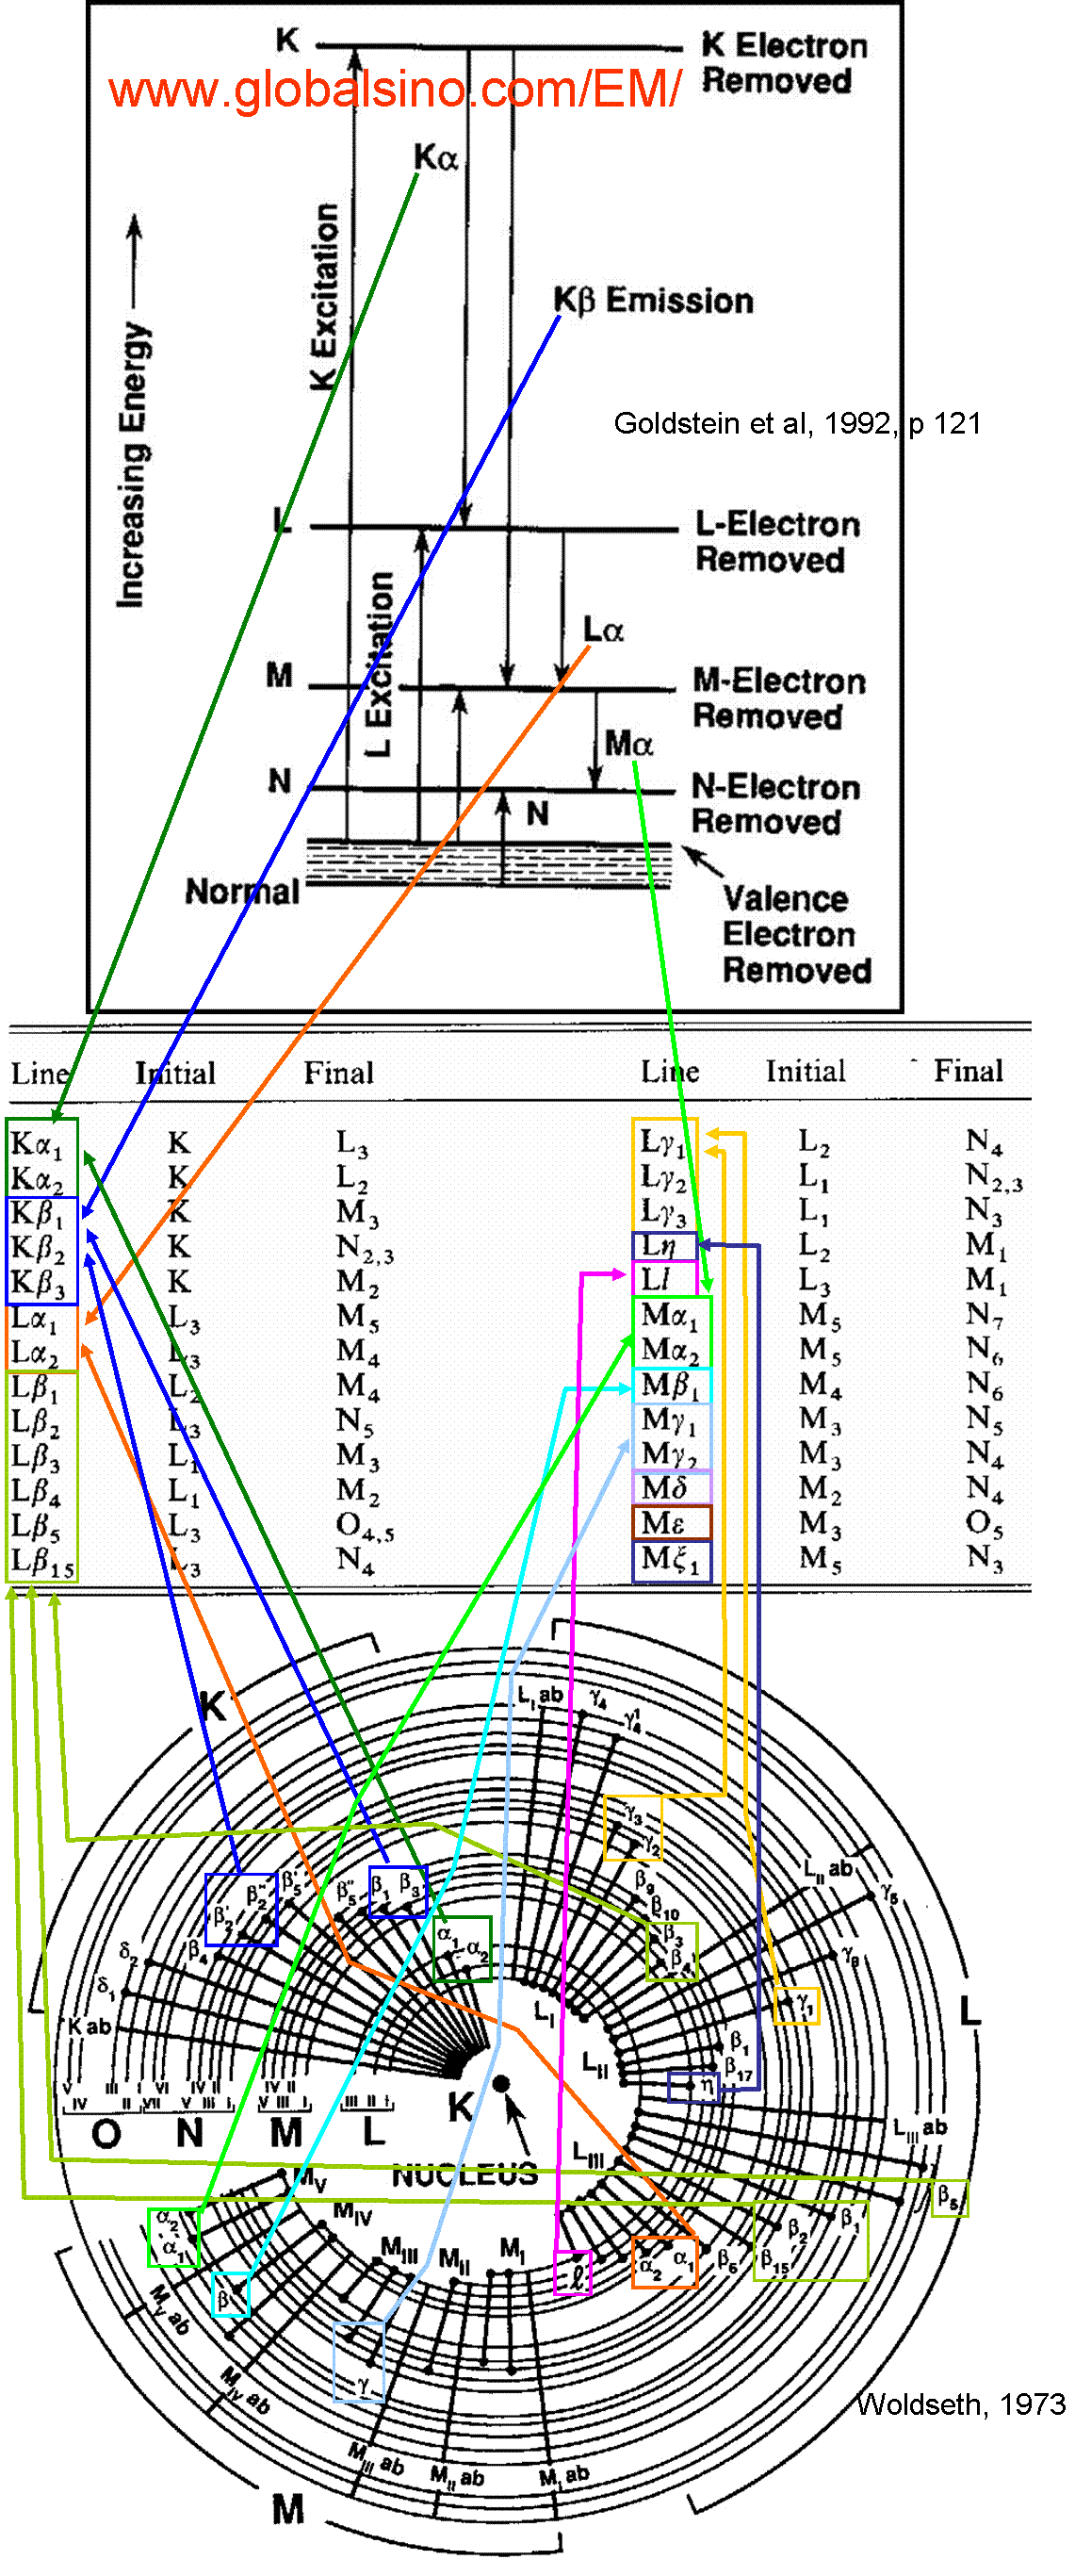 Initial and Final Levels for Characteristic X-Ray Lines